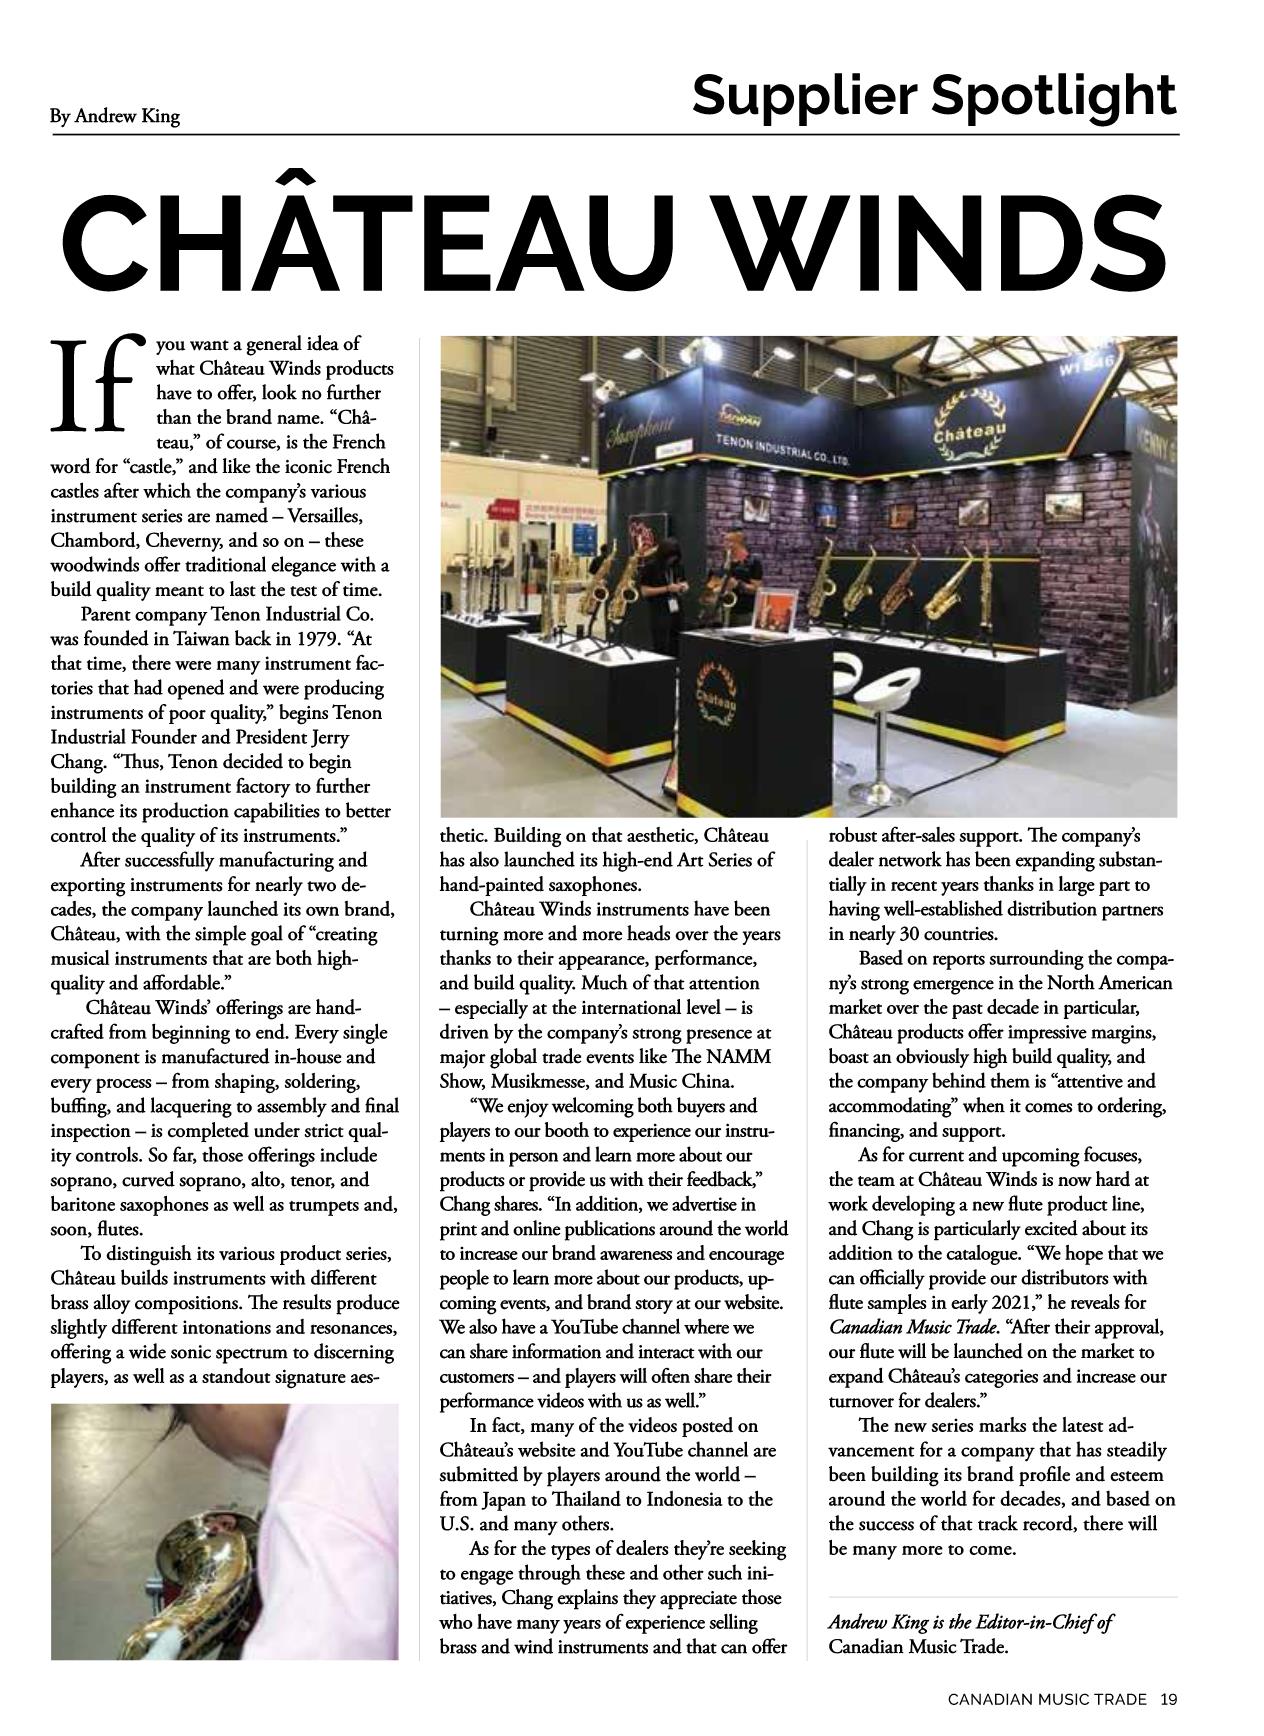 Canadian Music trade  chateau wind introduction